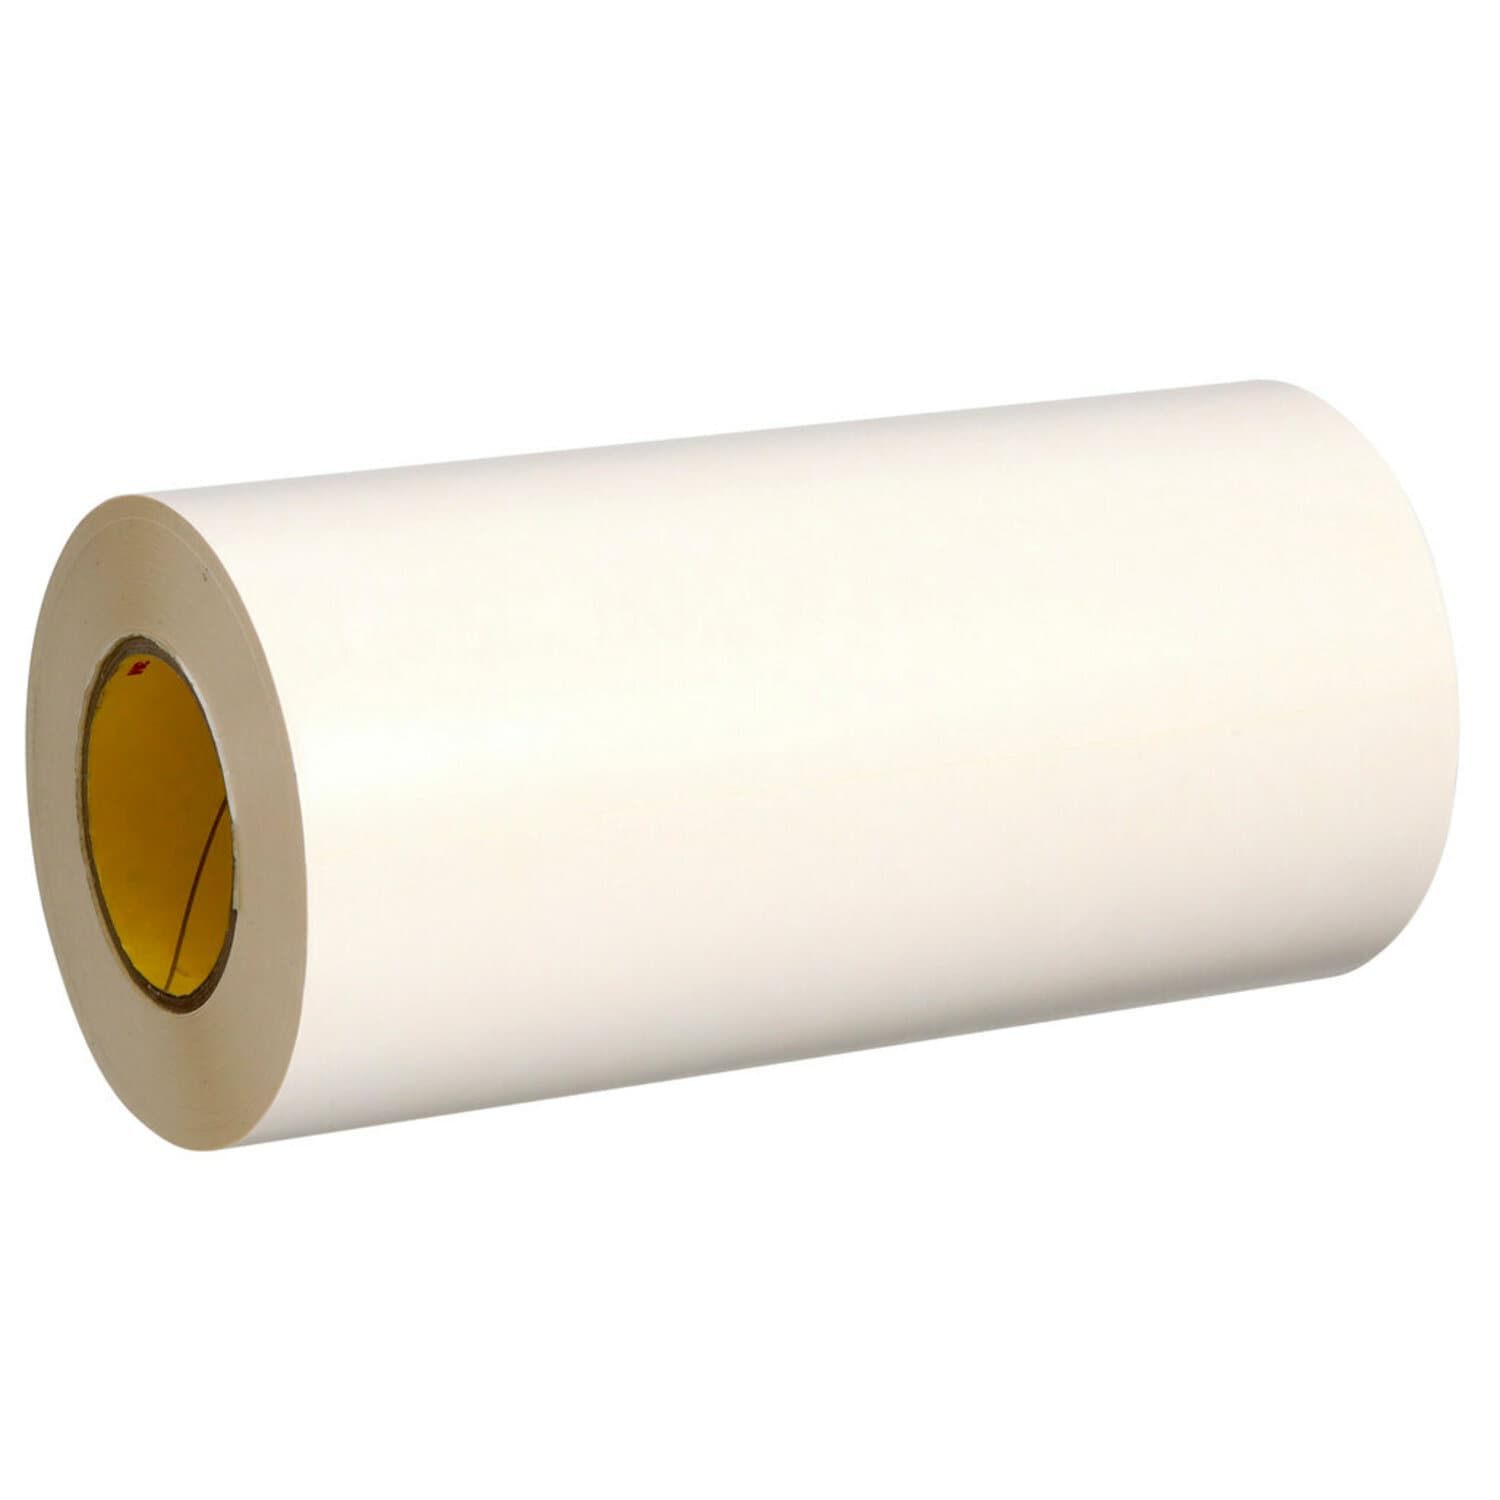 7100171705 - 3M Double Coated Polyester Tape 442KW, 3/4 in x 36 yds with No Liner